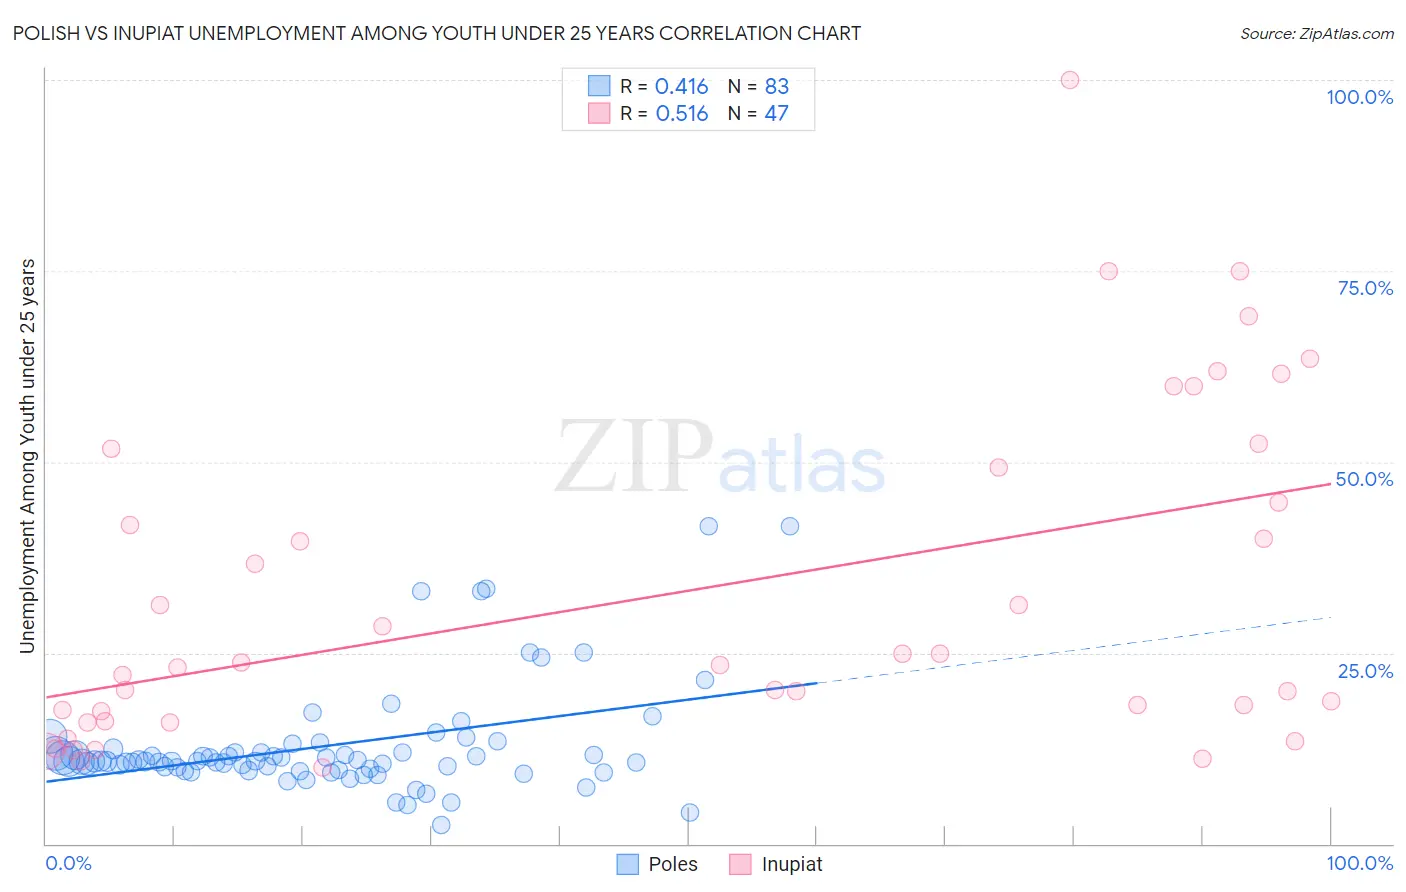 Polish vs Inupiat Unemployment Among Youth under 25 years